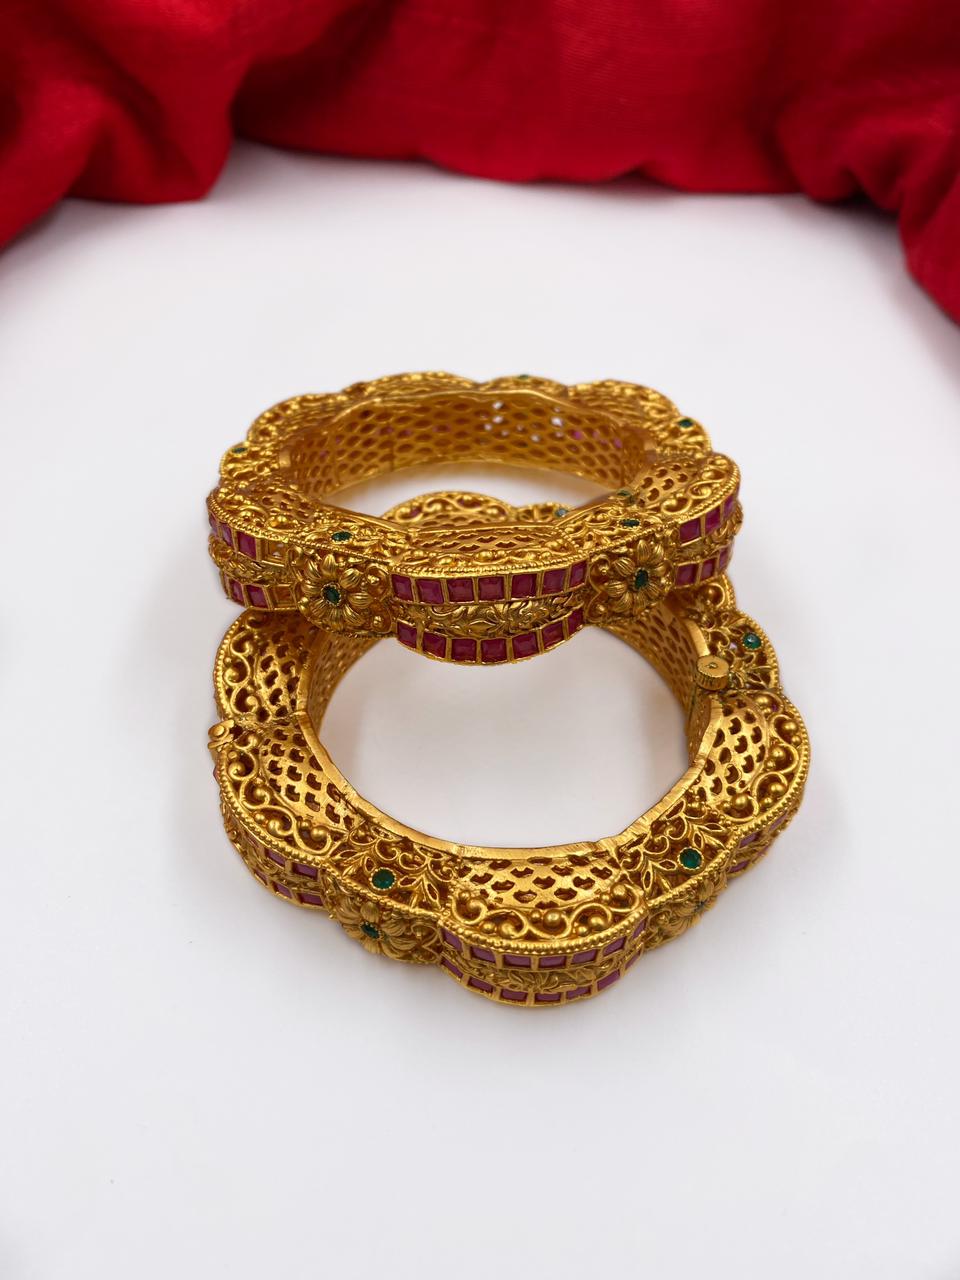 Gold Plated Antique Royal Look Bangles For Women By Gehna Shop Antique Golden Bangles